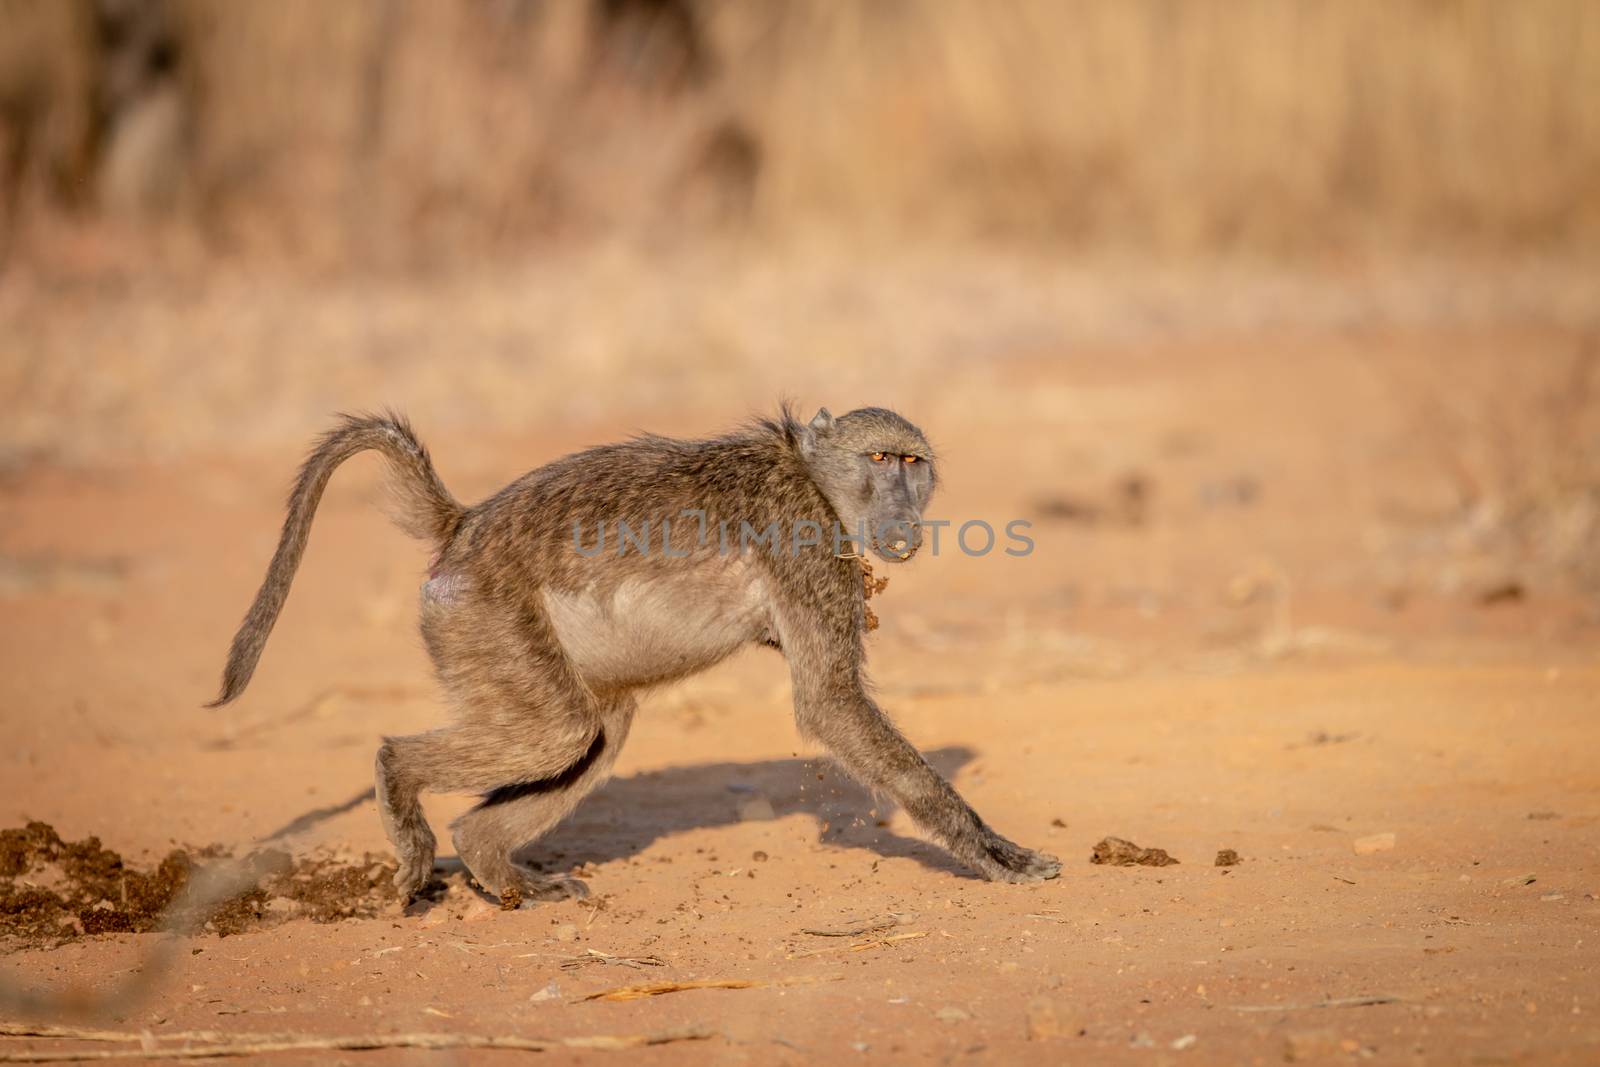 Chacma baboon running away with a block of food. by Simoneemanphotography